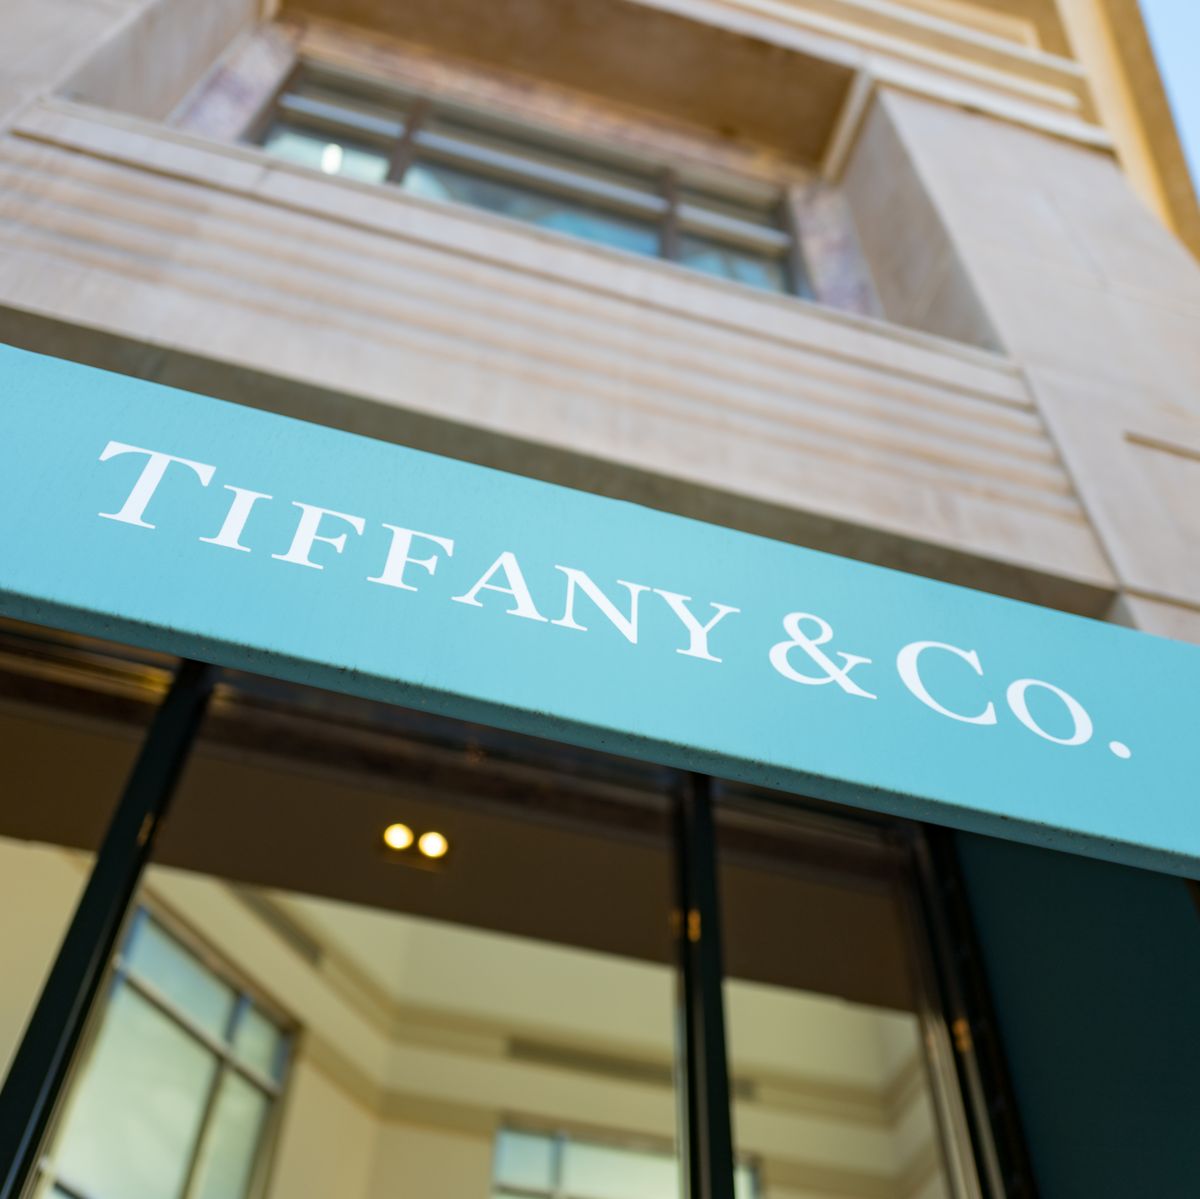 Louis Vuitton parent company secures deal to buy Tiffany for $16.2 billion  - The Boston Globe